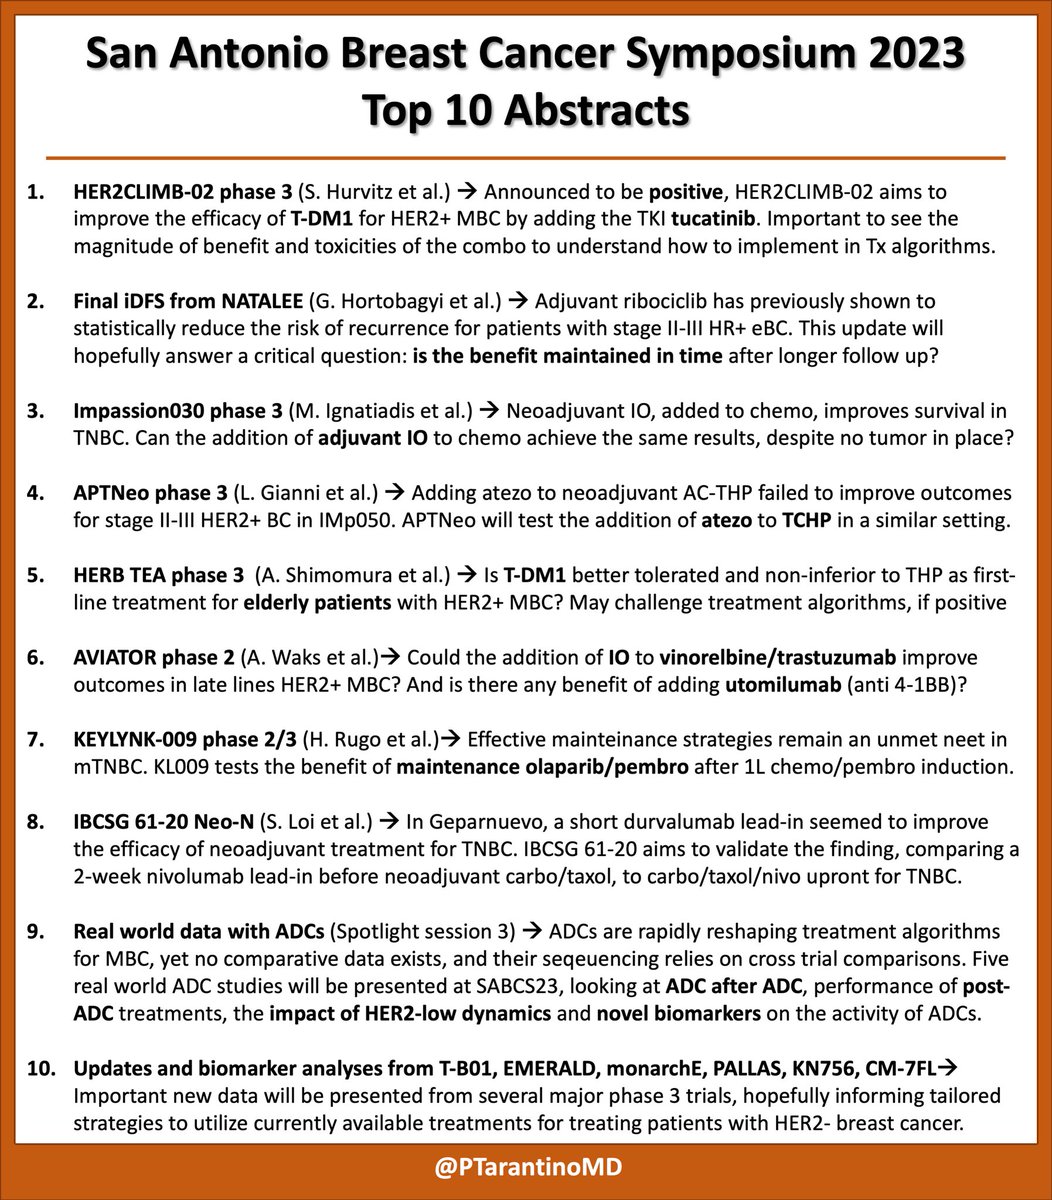 10 days to #SABCS23, 10 abstracts to keep an eye on. They include practice changing studies, highly awaited updates, important biomarker analyses, & RWD, among others. Not an easy selection: many more impactful studies will be presented. Full program here: sabcs.org/FullProgram